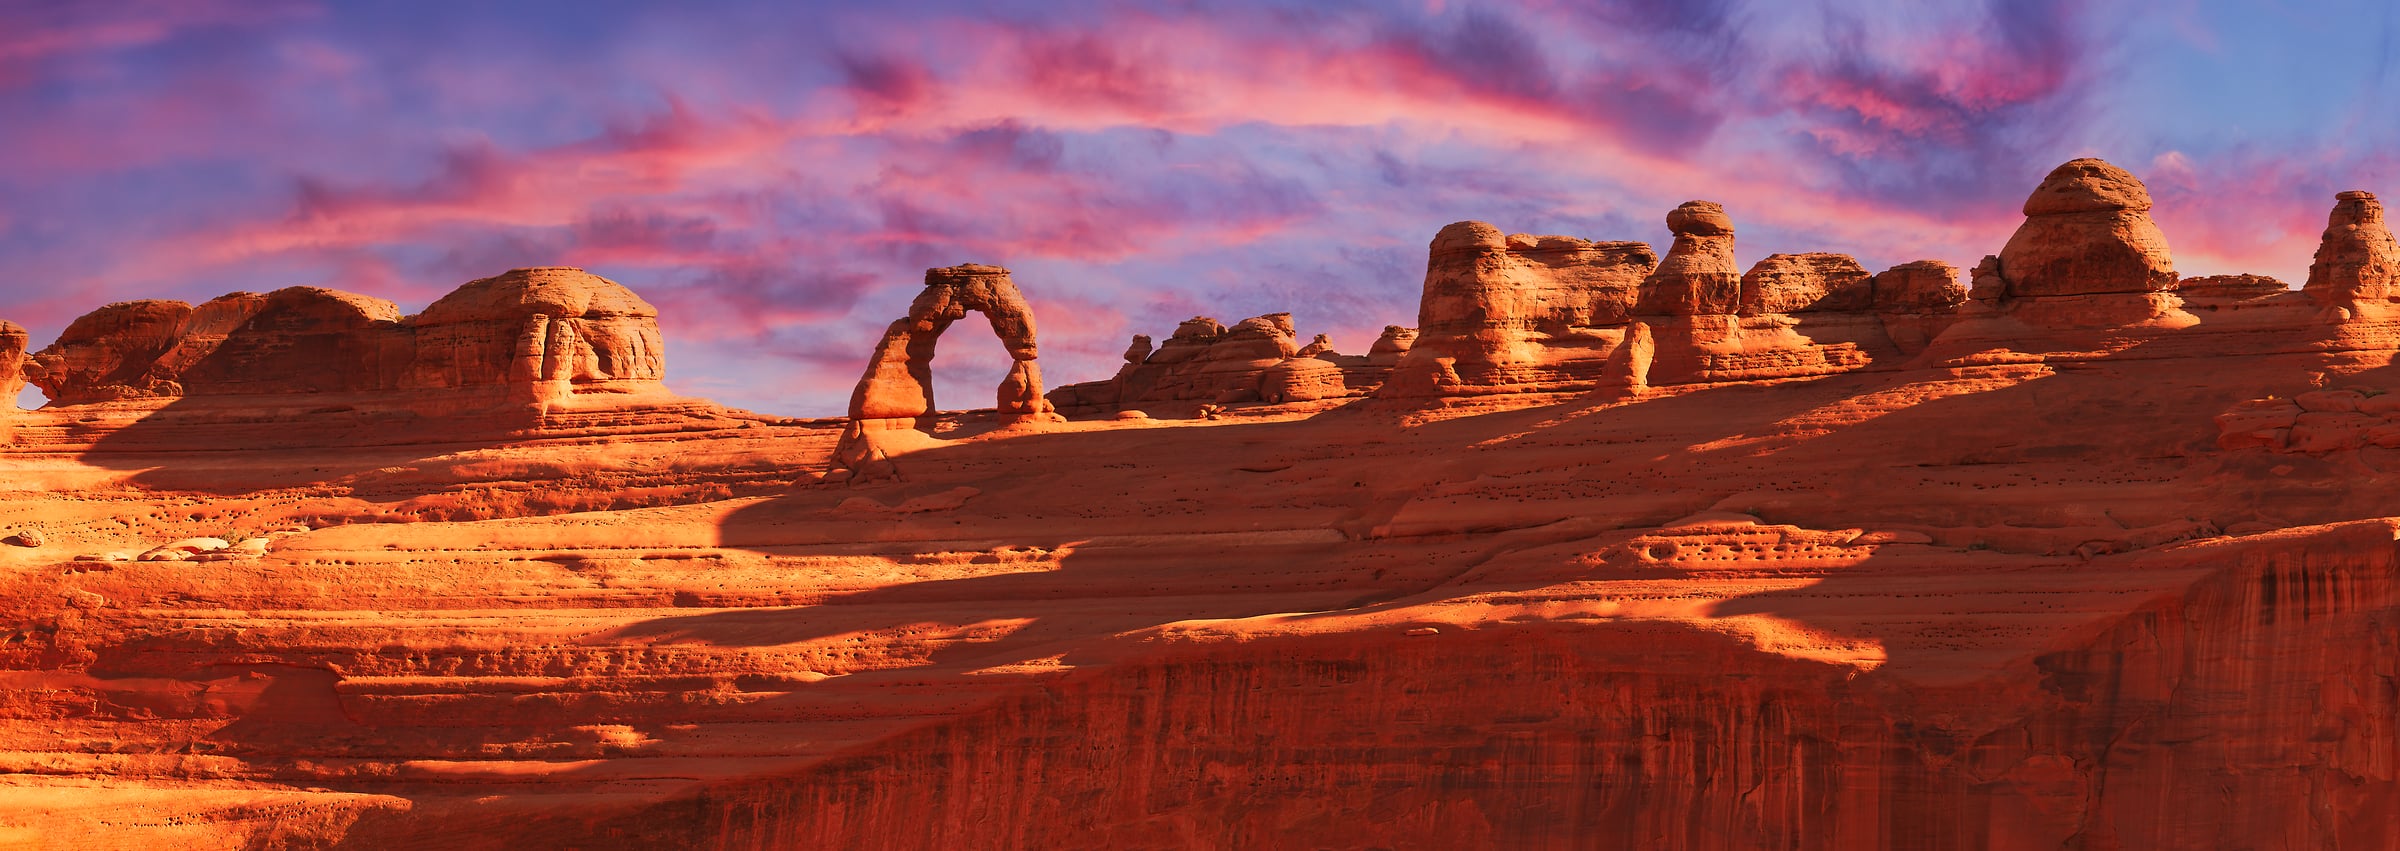 276 megapixels! A very high resolution, large-format VAST photo print of Delicate Arch in Arches National Park at sunset; landscape photograph created by David David in Utah.